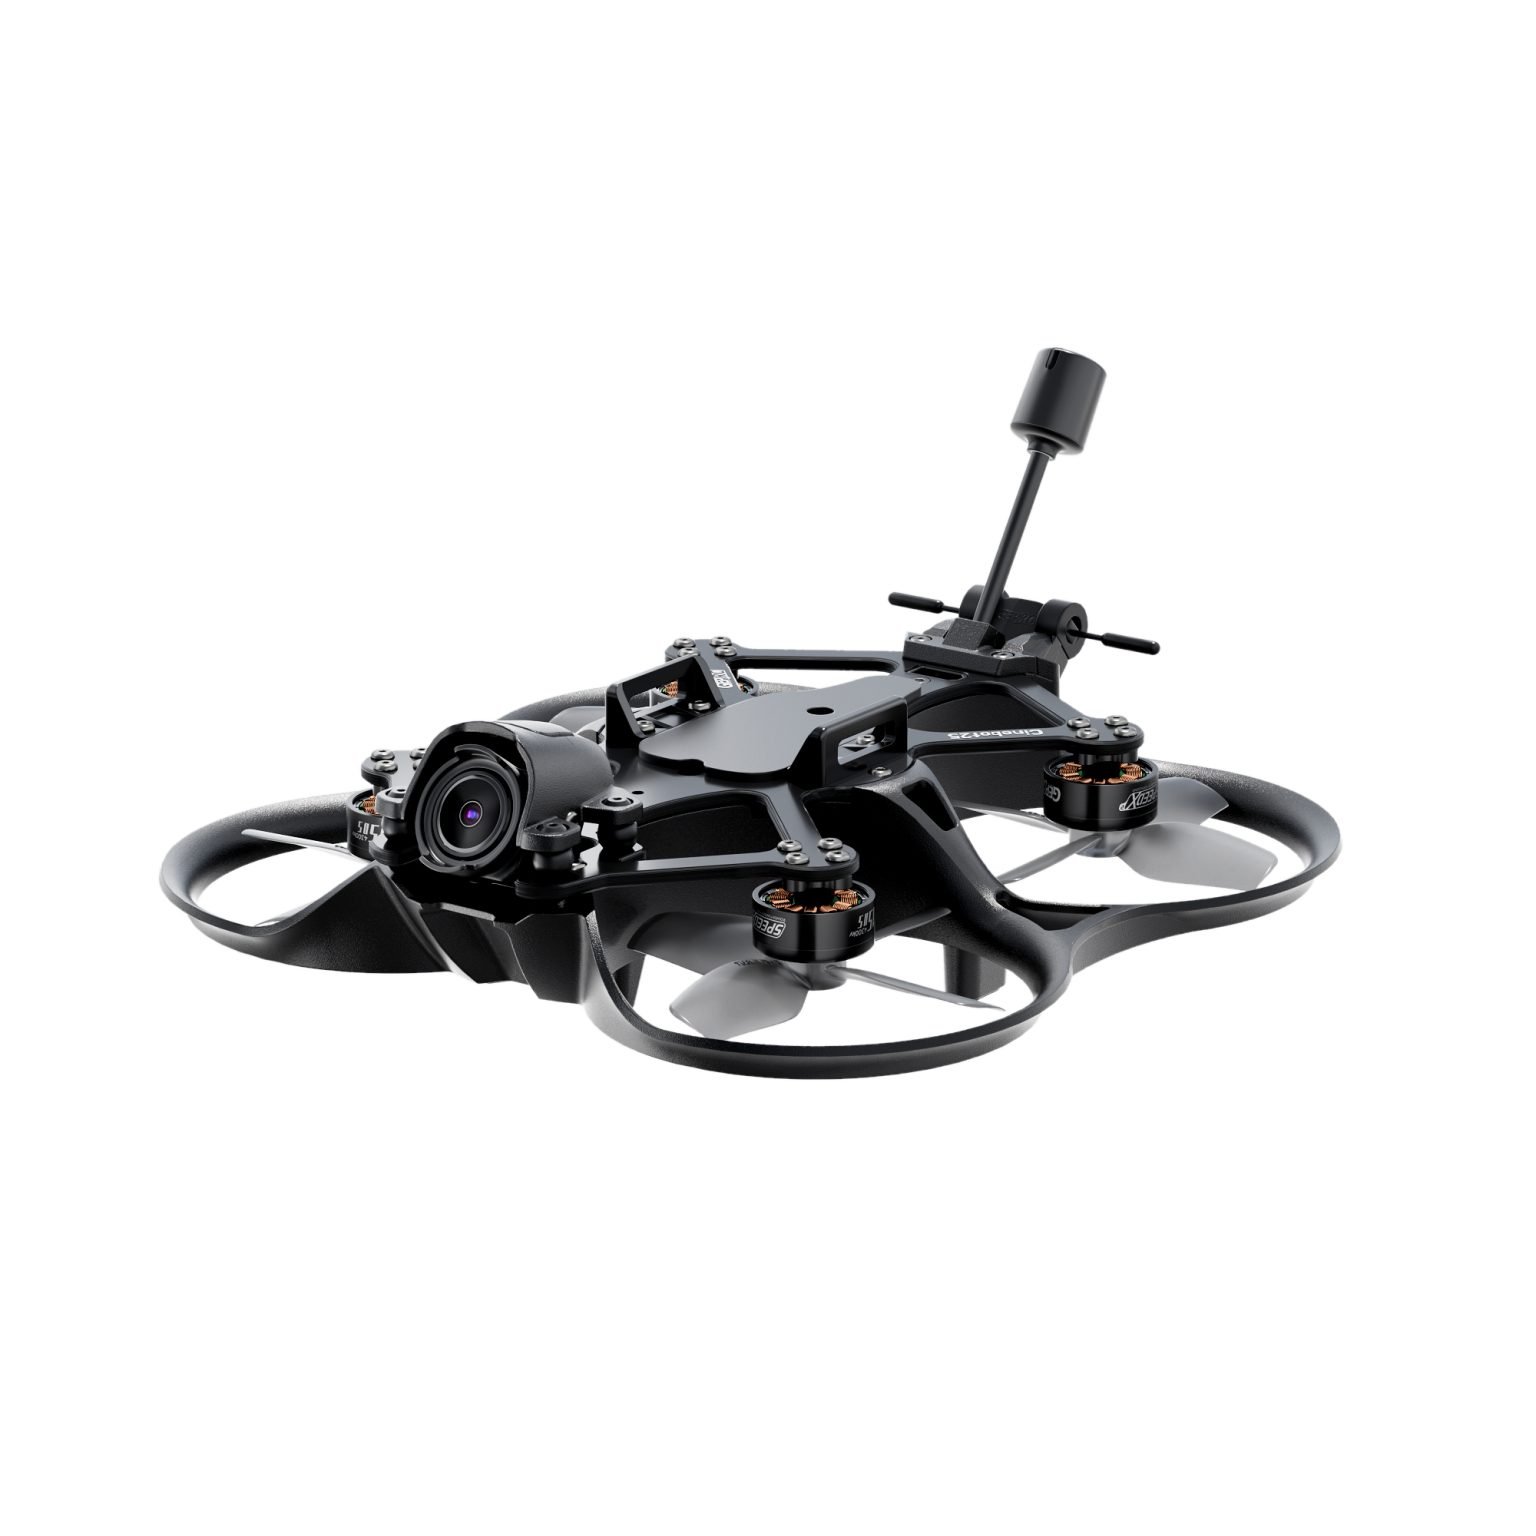 GEPRC Cinebot25 S HD O3 Quadcopter ELRS 2.4G